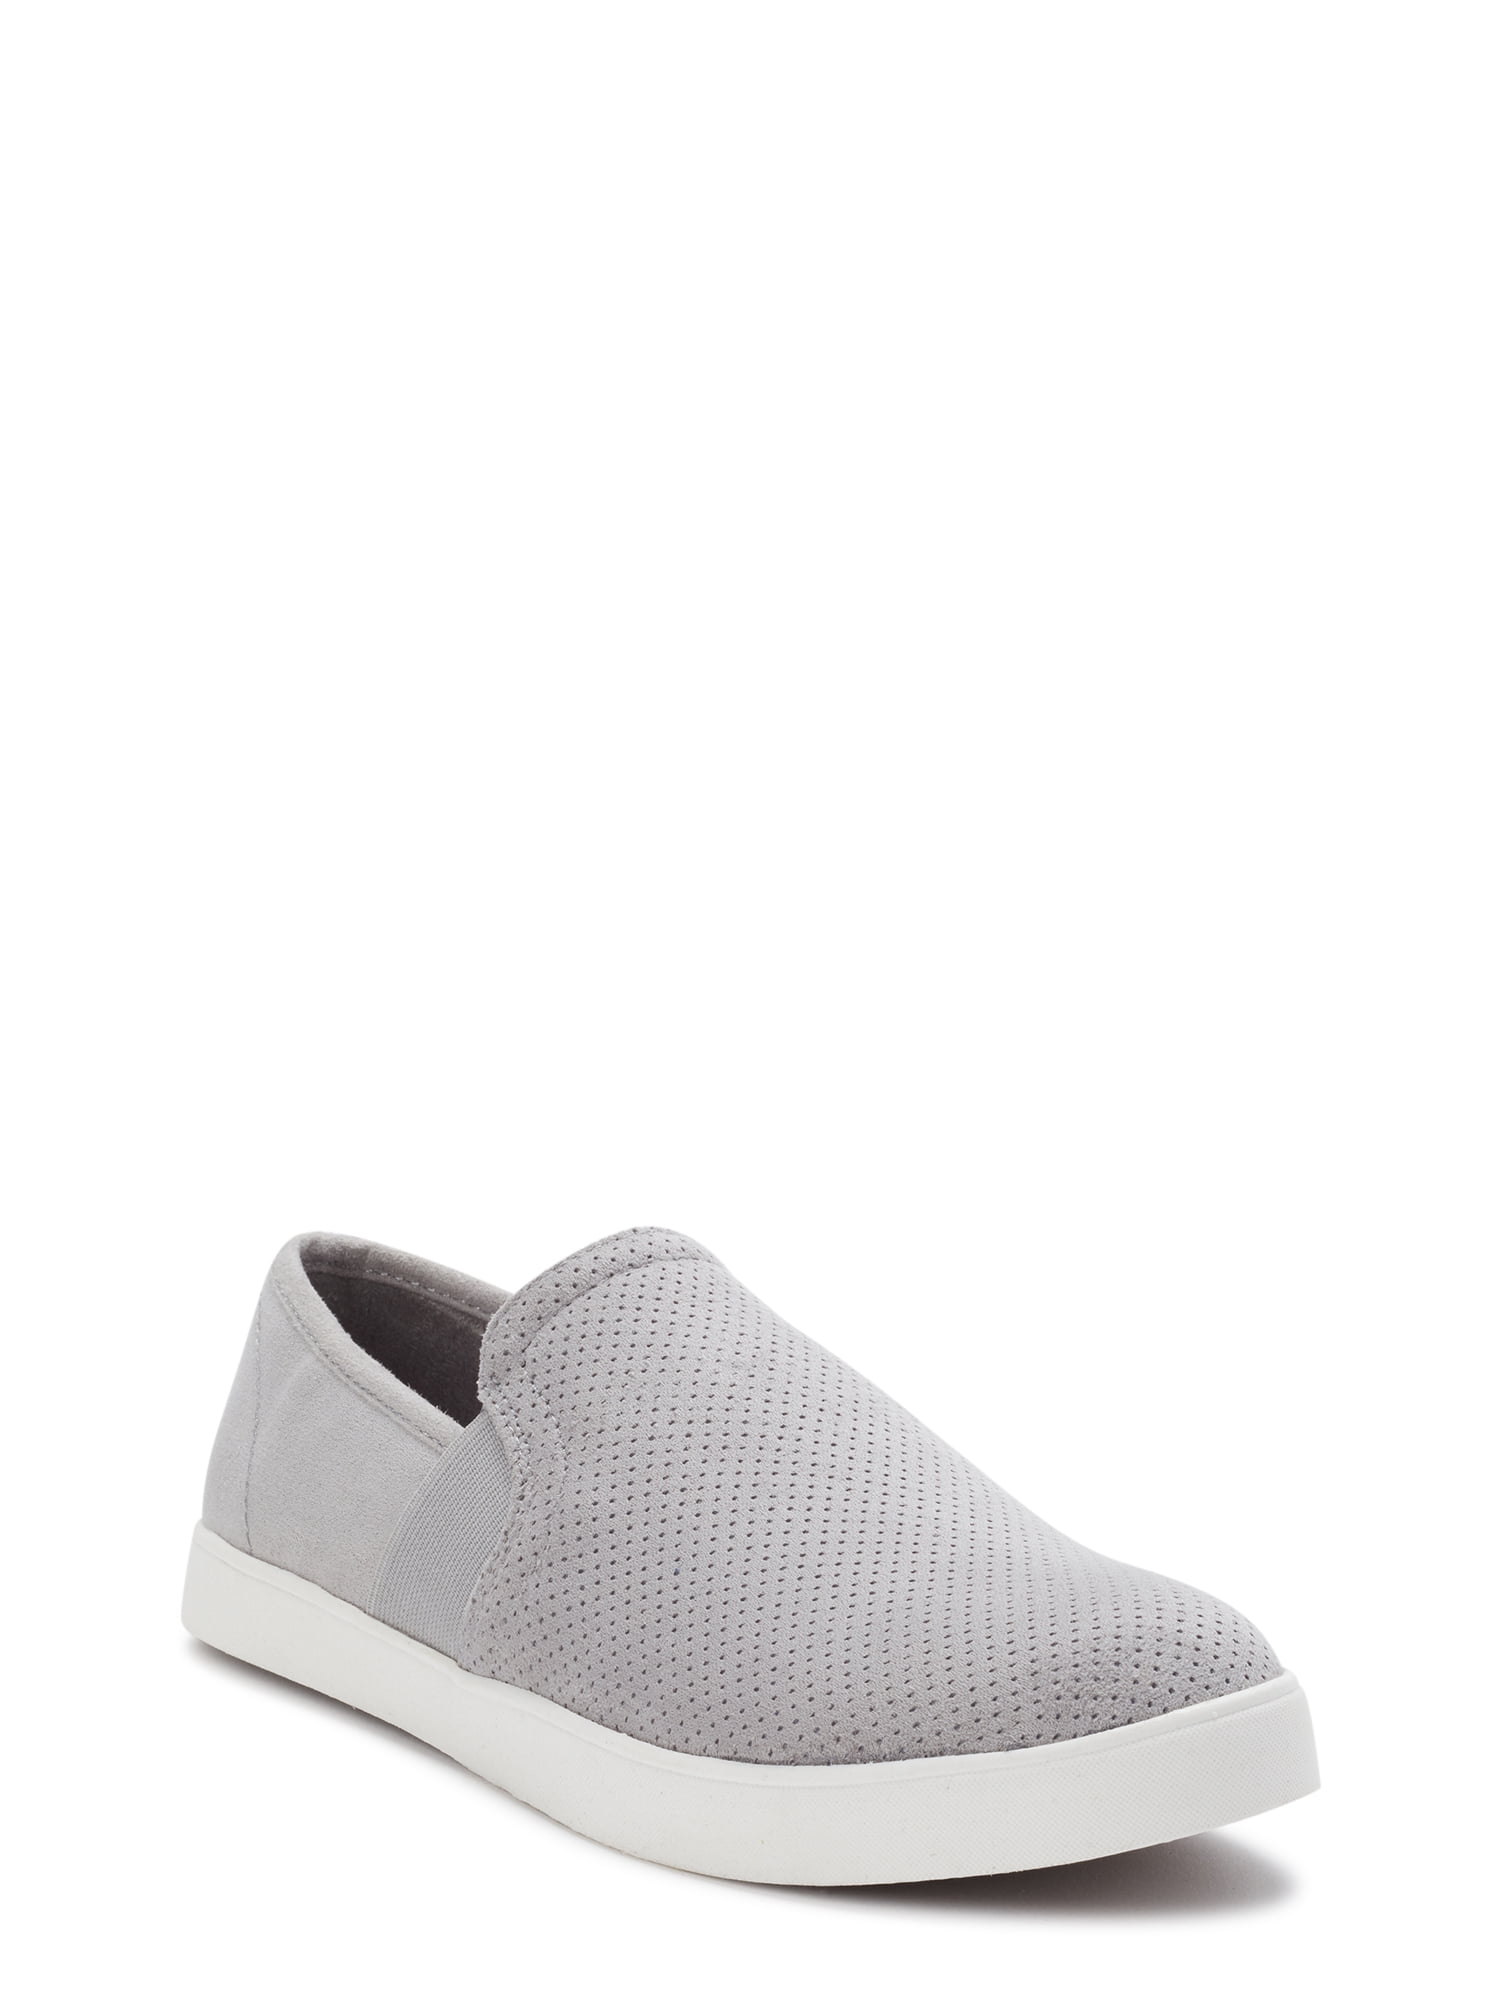 womens grey slip on shoes